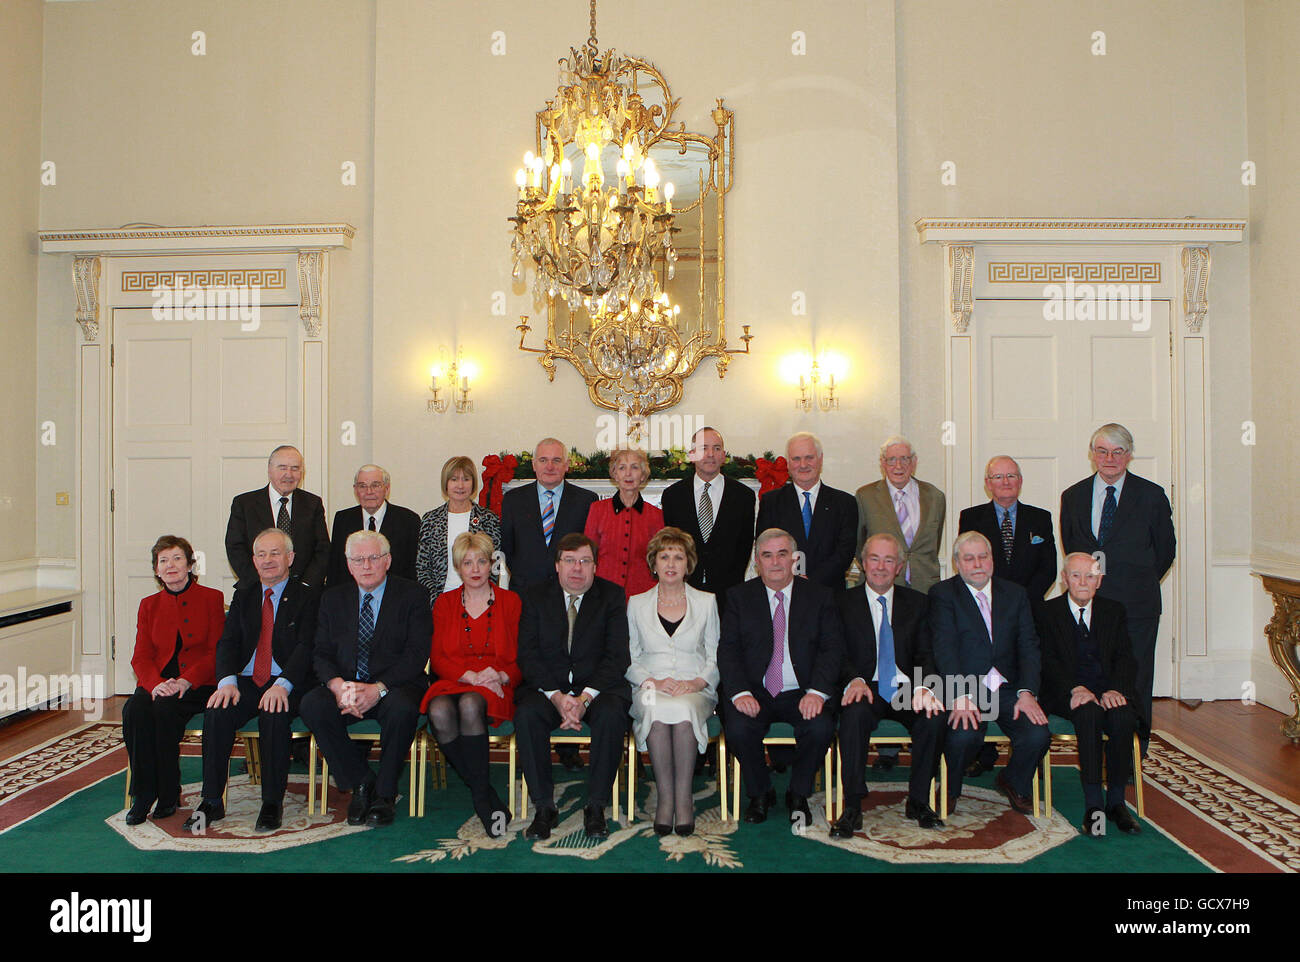 Members of the Council of State meet at Aras an Uachtarain to discuss the Credit Institutions (Stablisation) Bill 2010. (Back row from left) Albert Reynolds, Hon Mr Justice Thomas Finlay, Mary Davis, Bertie Ahern, Anastacia Crickley, Prof.Denis Moloney, John Bruton, Garret Fitzgerald, Col.Harvey Bicker, (Front row from left) Mary Robinson, Senator Pat Moylan, Ceann Comhairle Seamus Kirk, Tanaiste Mary Coughlan, Taoiseach Brian Cowen, President Mary McAleese, Chief Justice John Murray, Justice Nicholas Kearns, Attorney General Paul Gallagher and Liam Cosgrave. Stock Photo